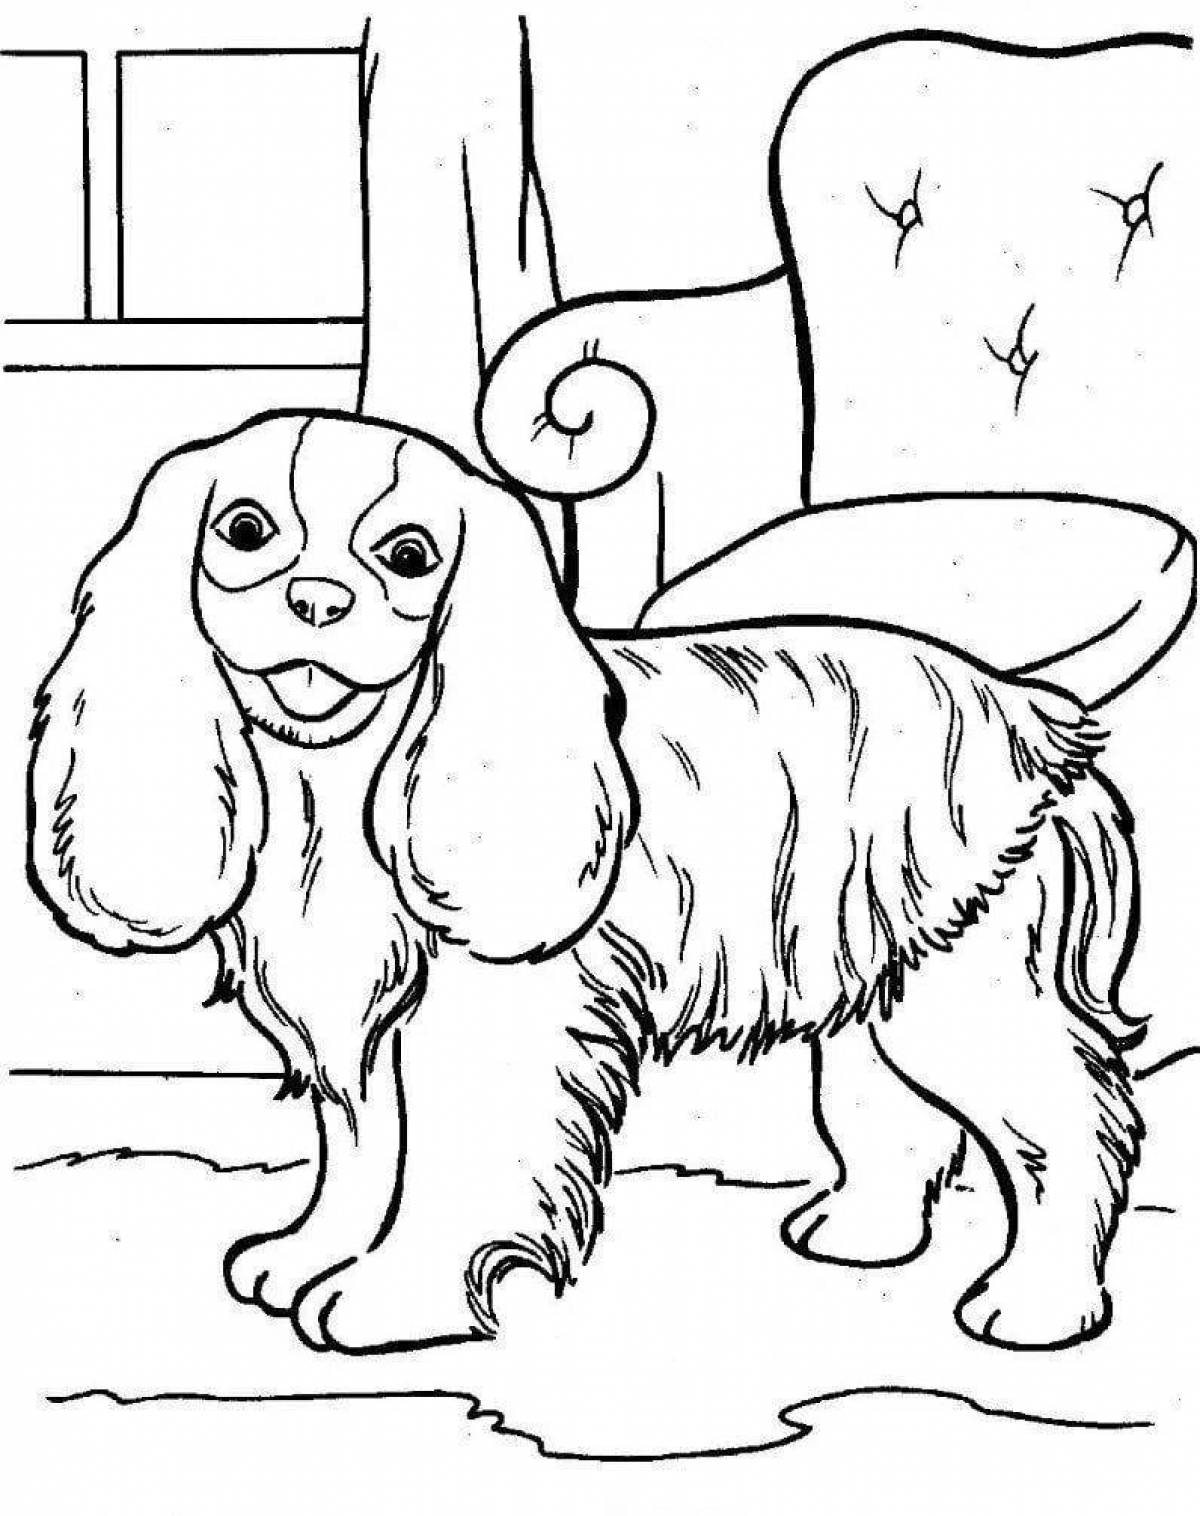 Snuggled dog coloring pages for boys